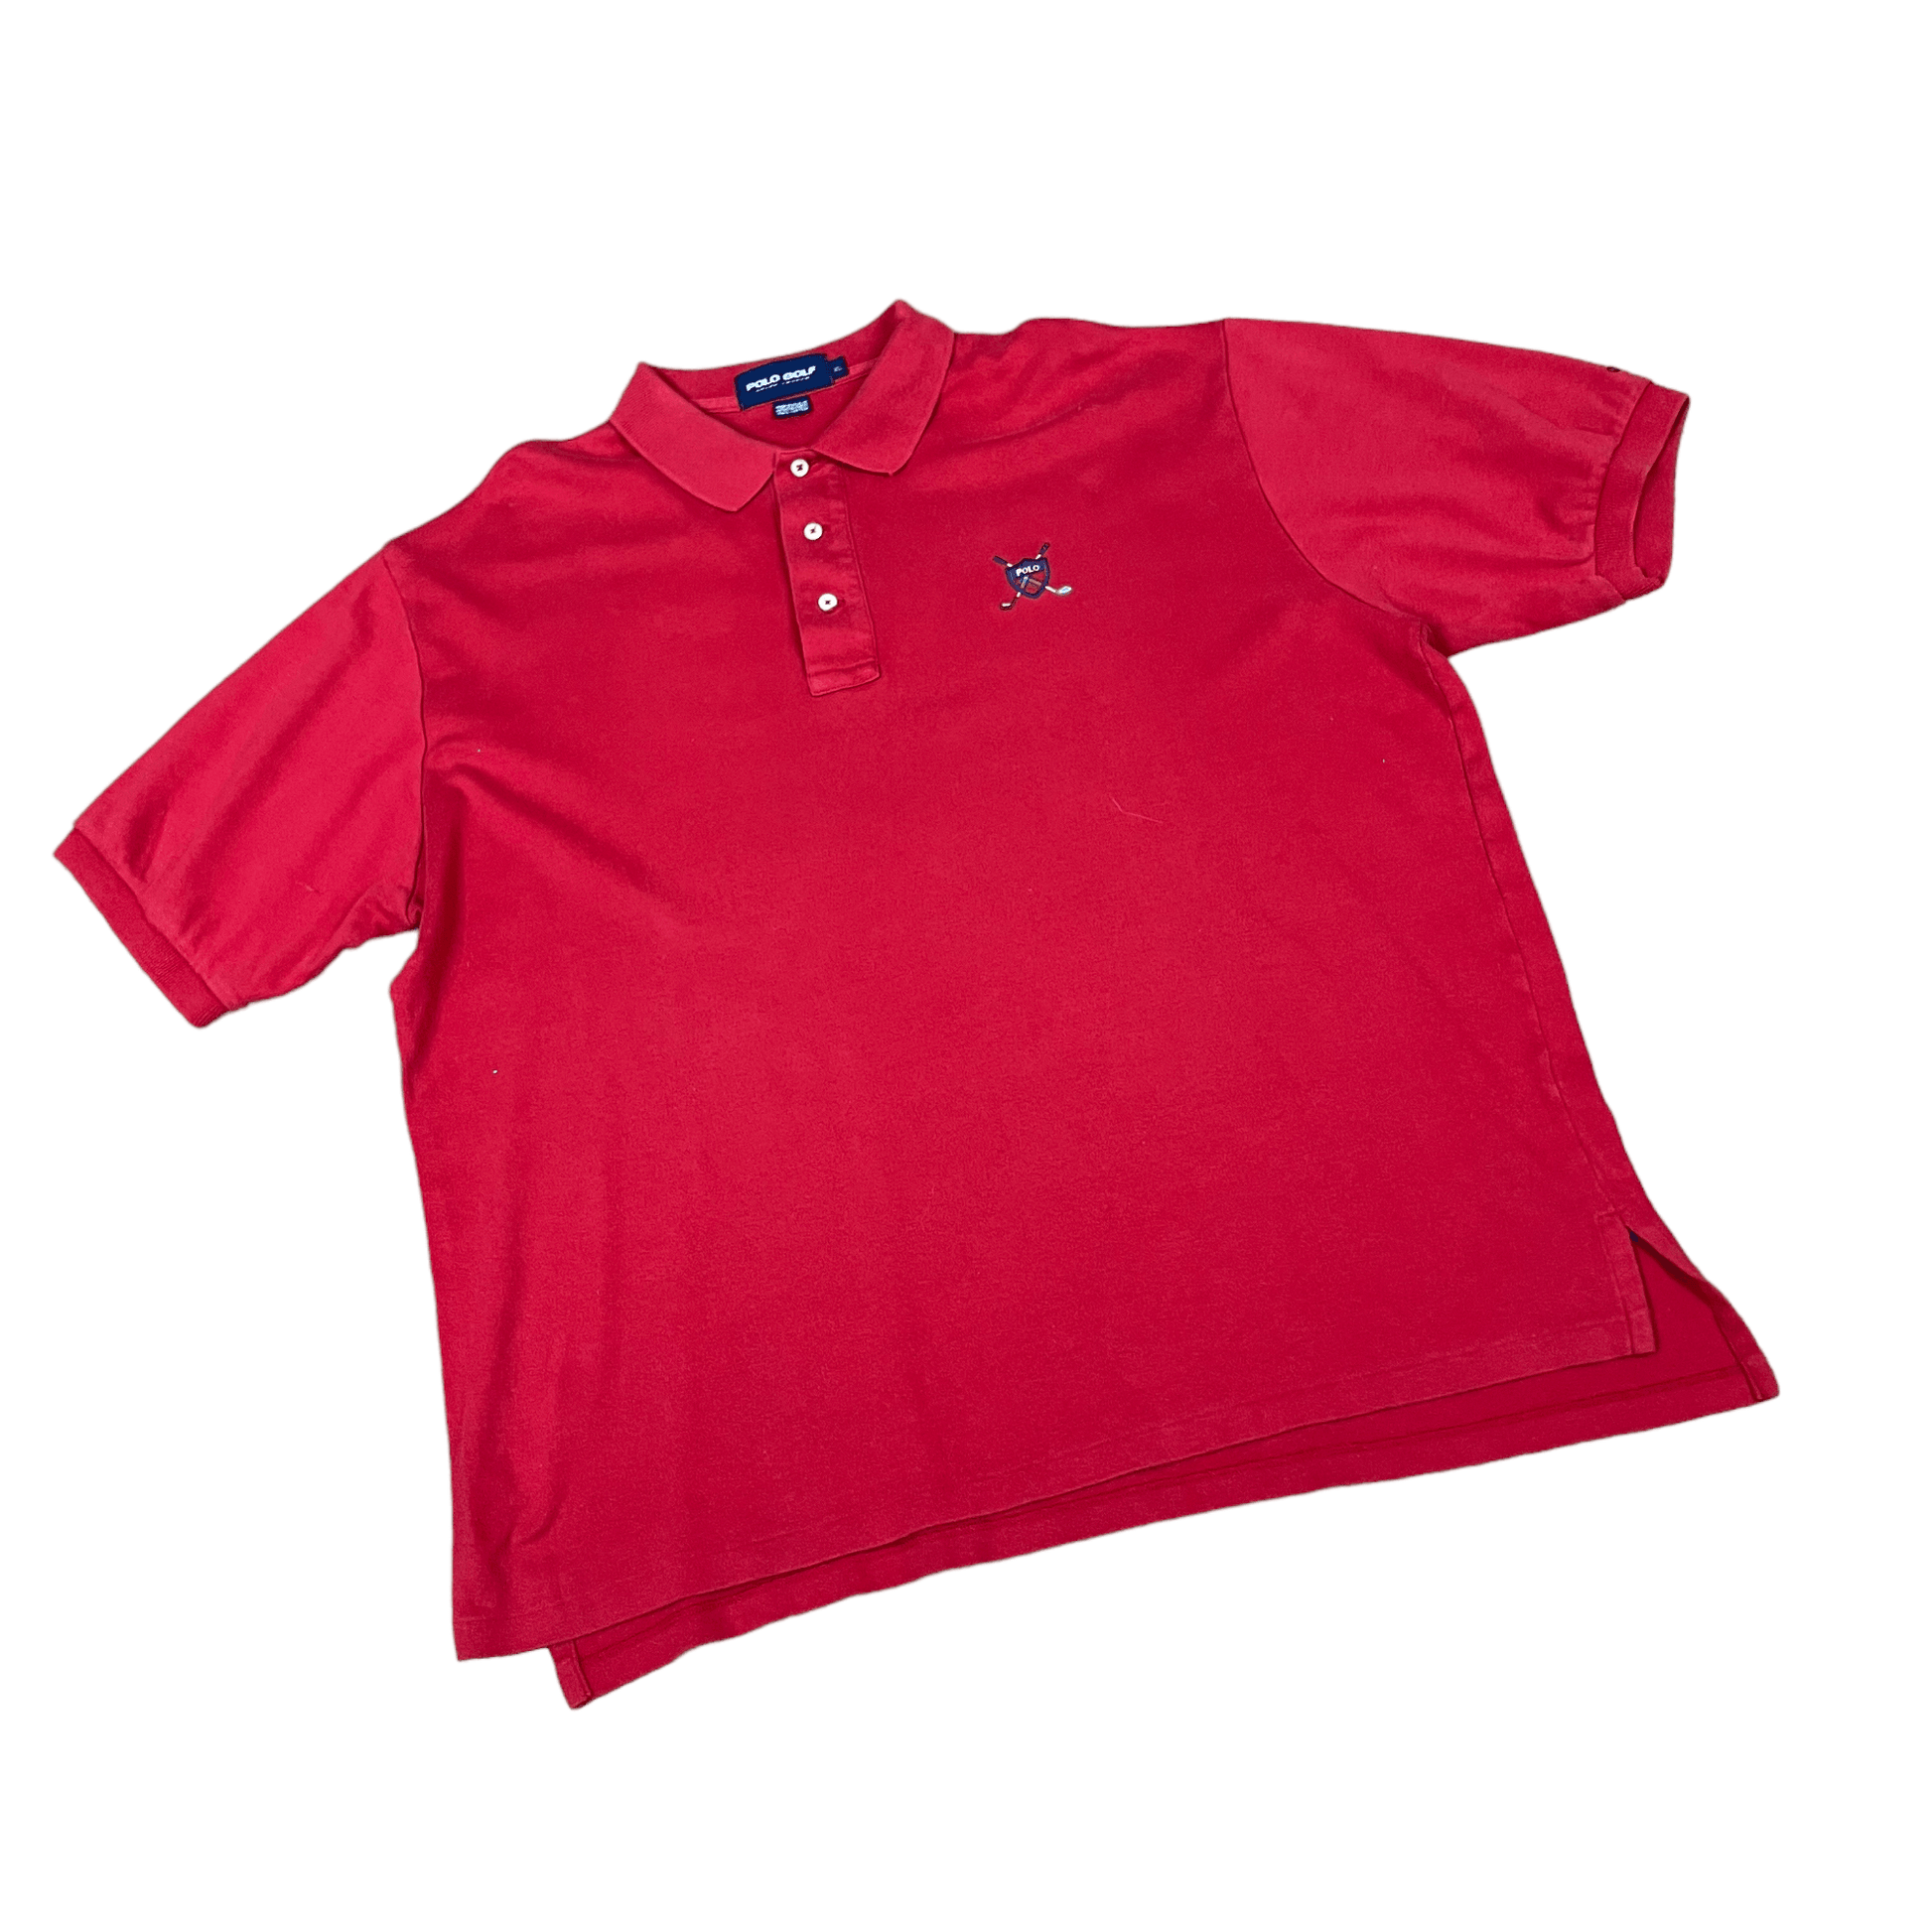 Vintage Red Ralph Lauren Polo Golf Polo Shirt - Extra Large - The Streetwear Studio